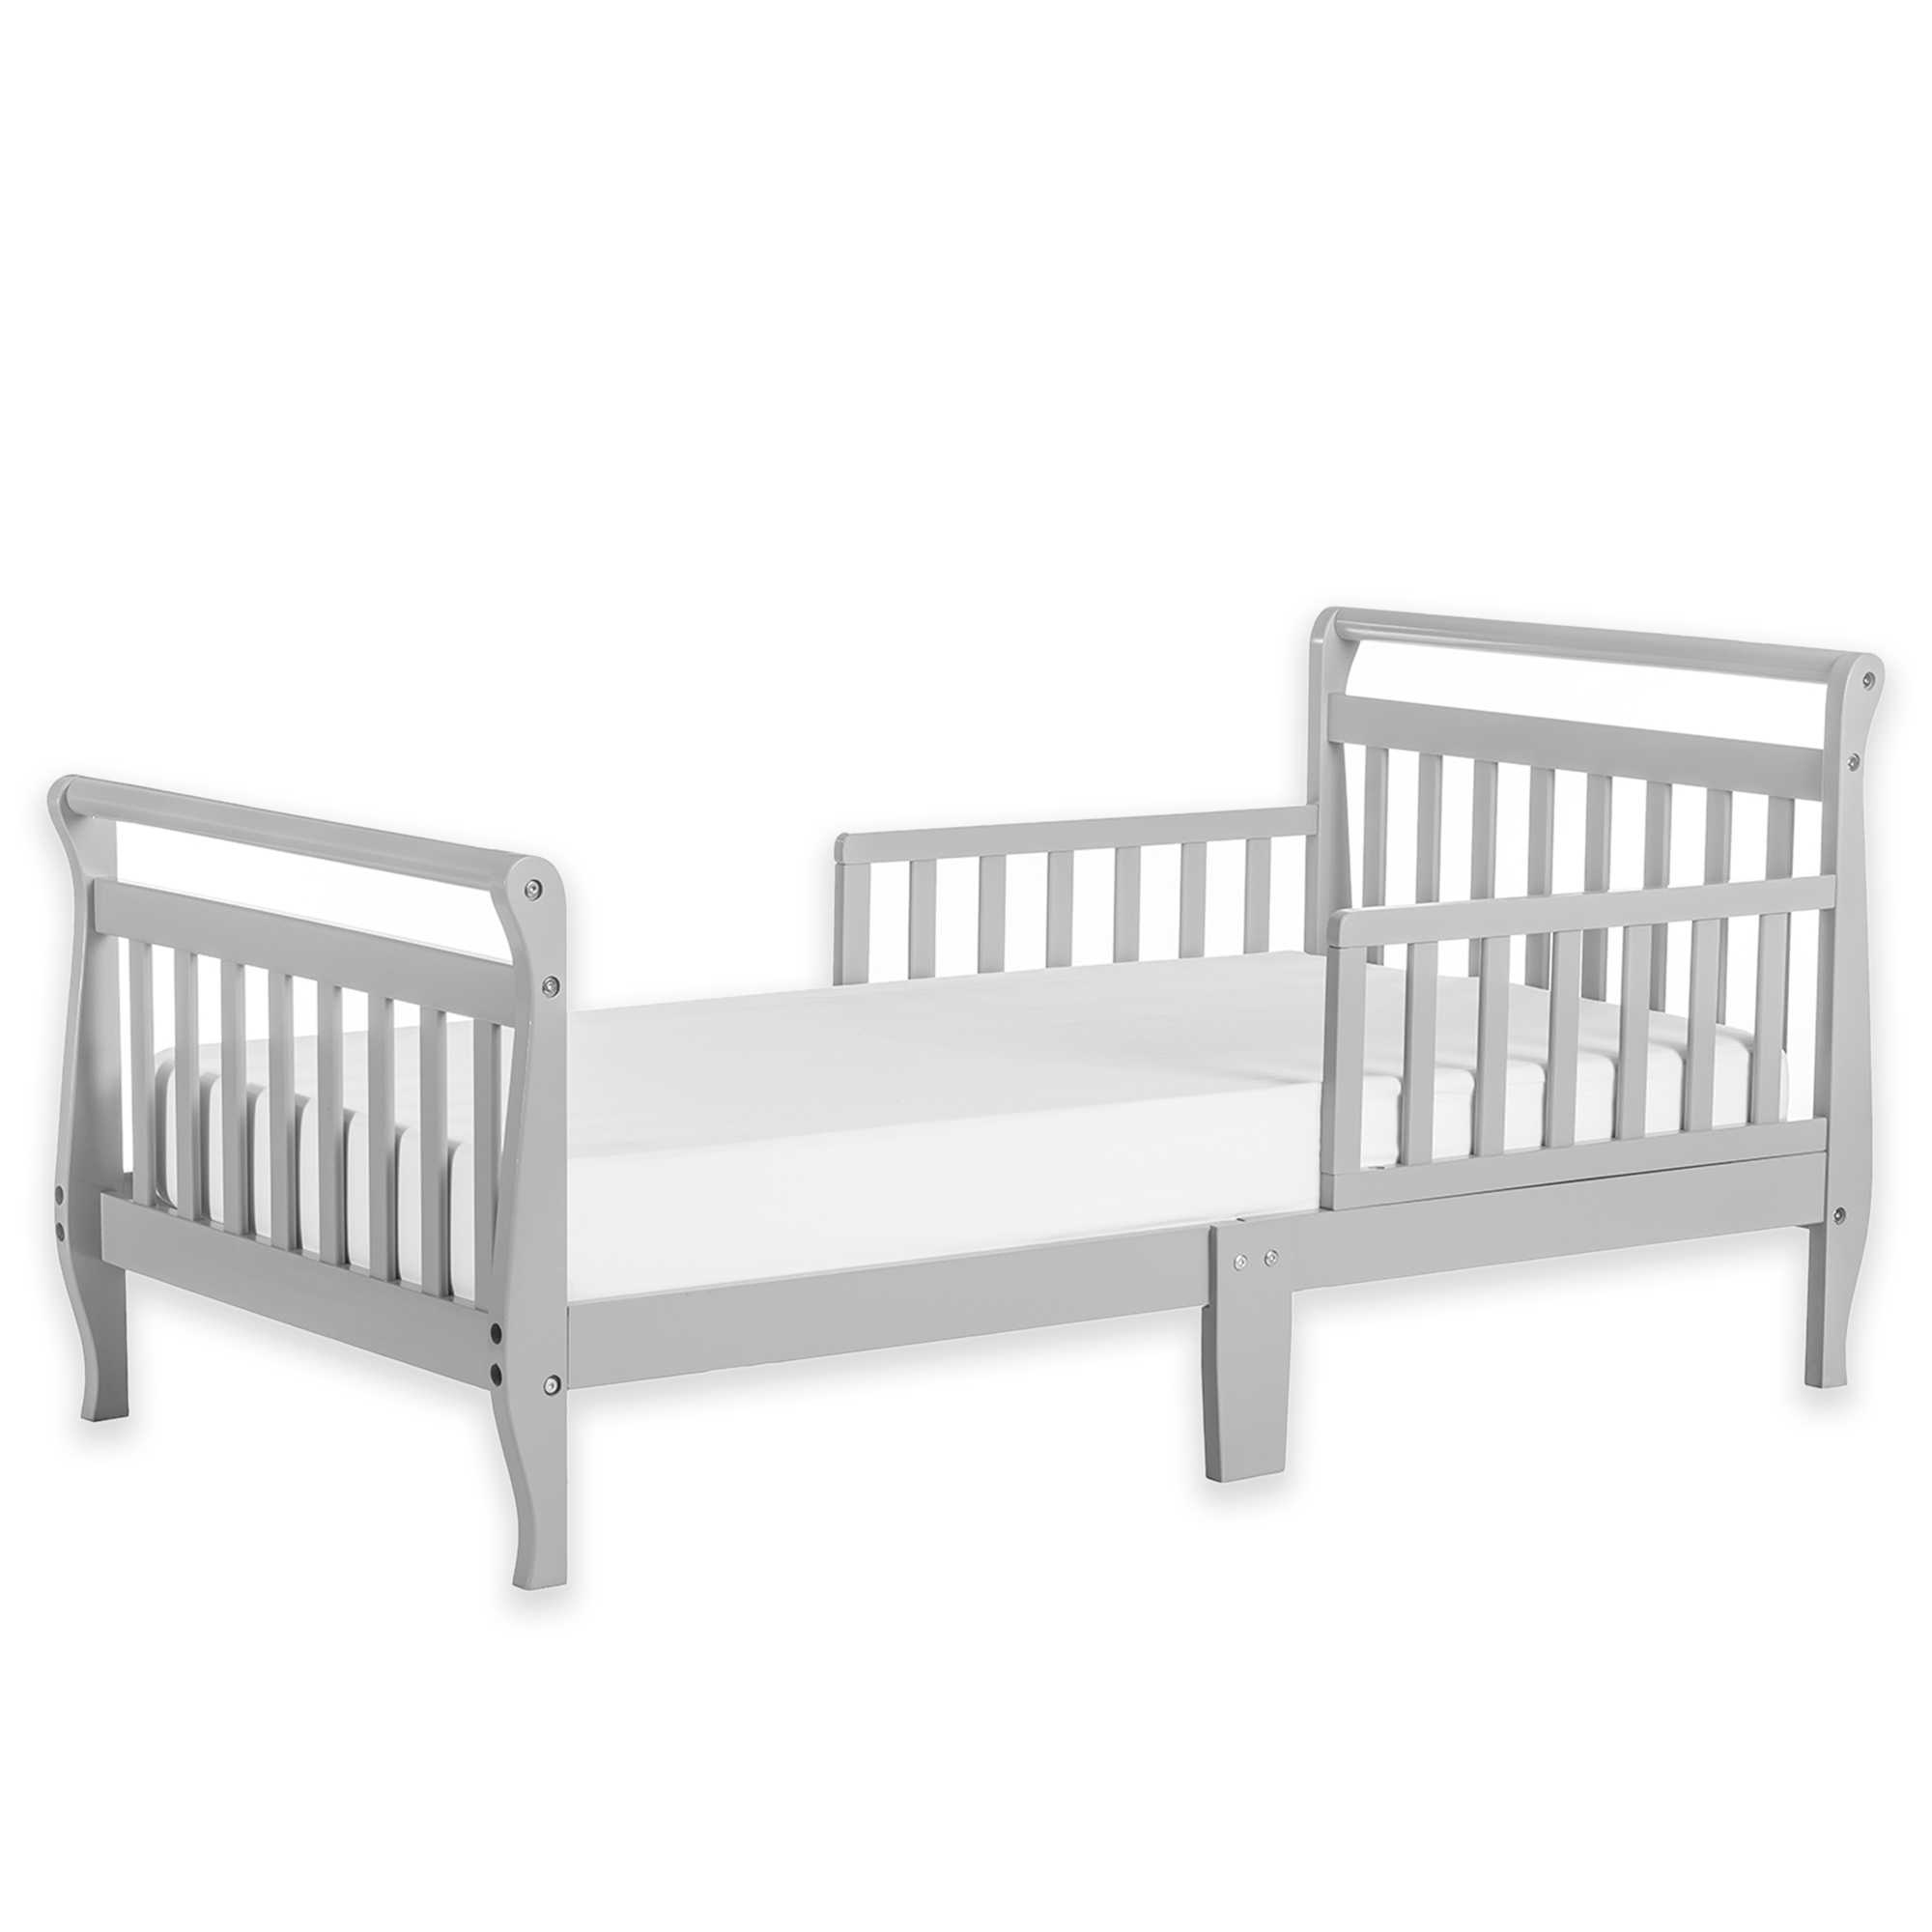 Dream On Me Sleigh Toddler Bed, White - image 4 of 4